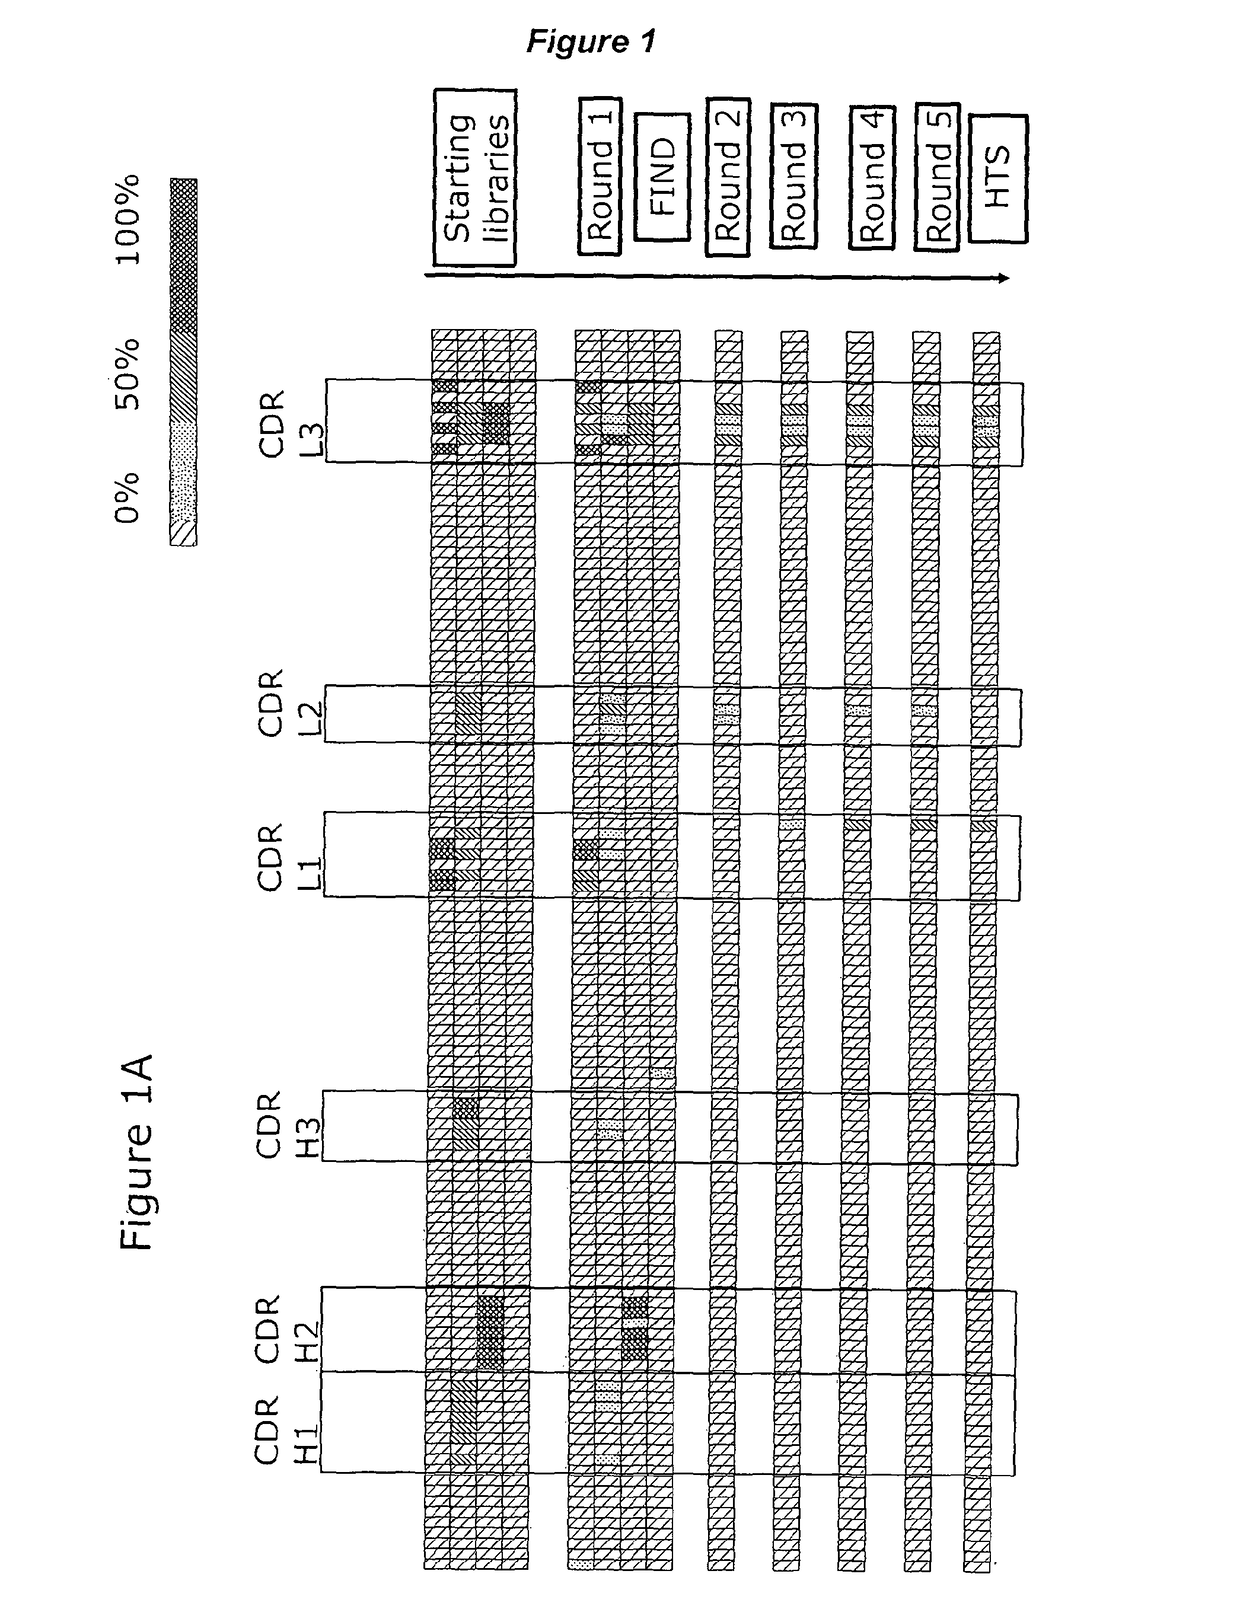 Anti-CD40 antibodies and methods of treating cancer